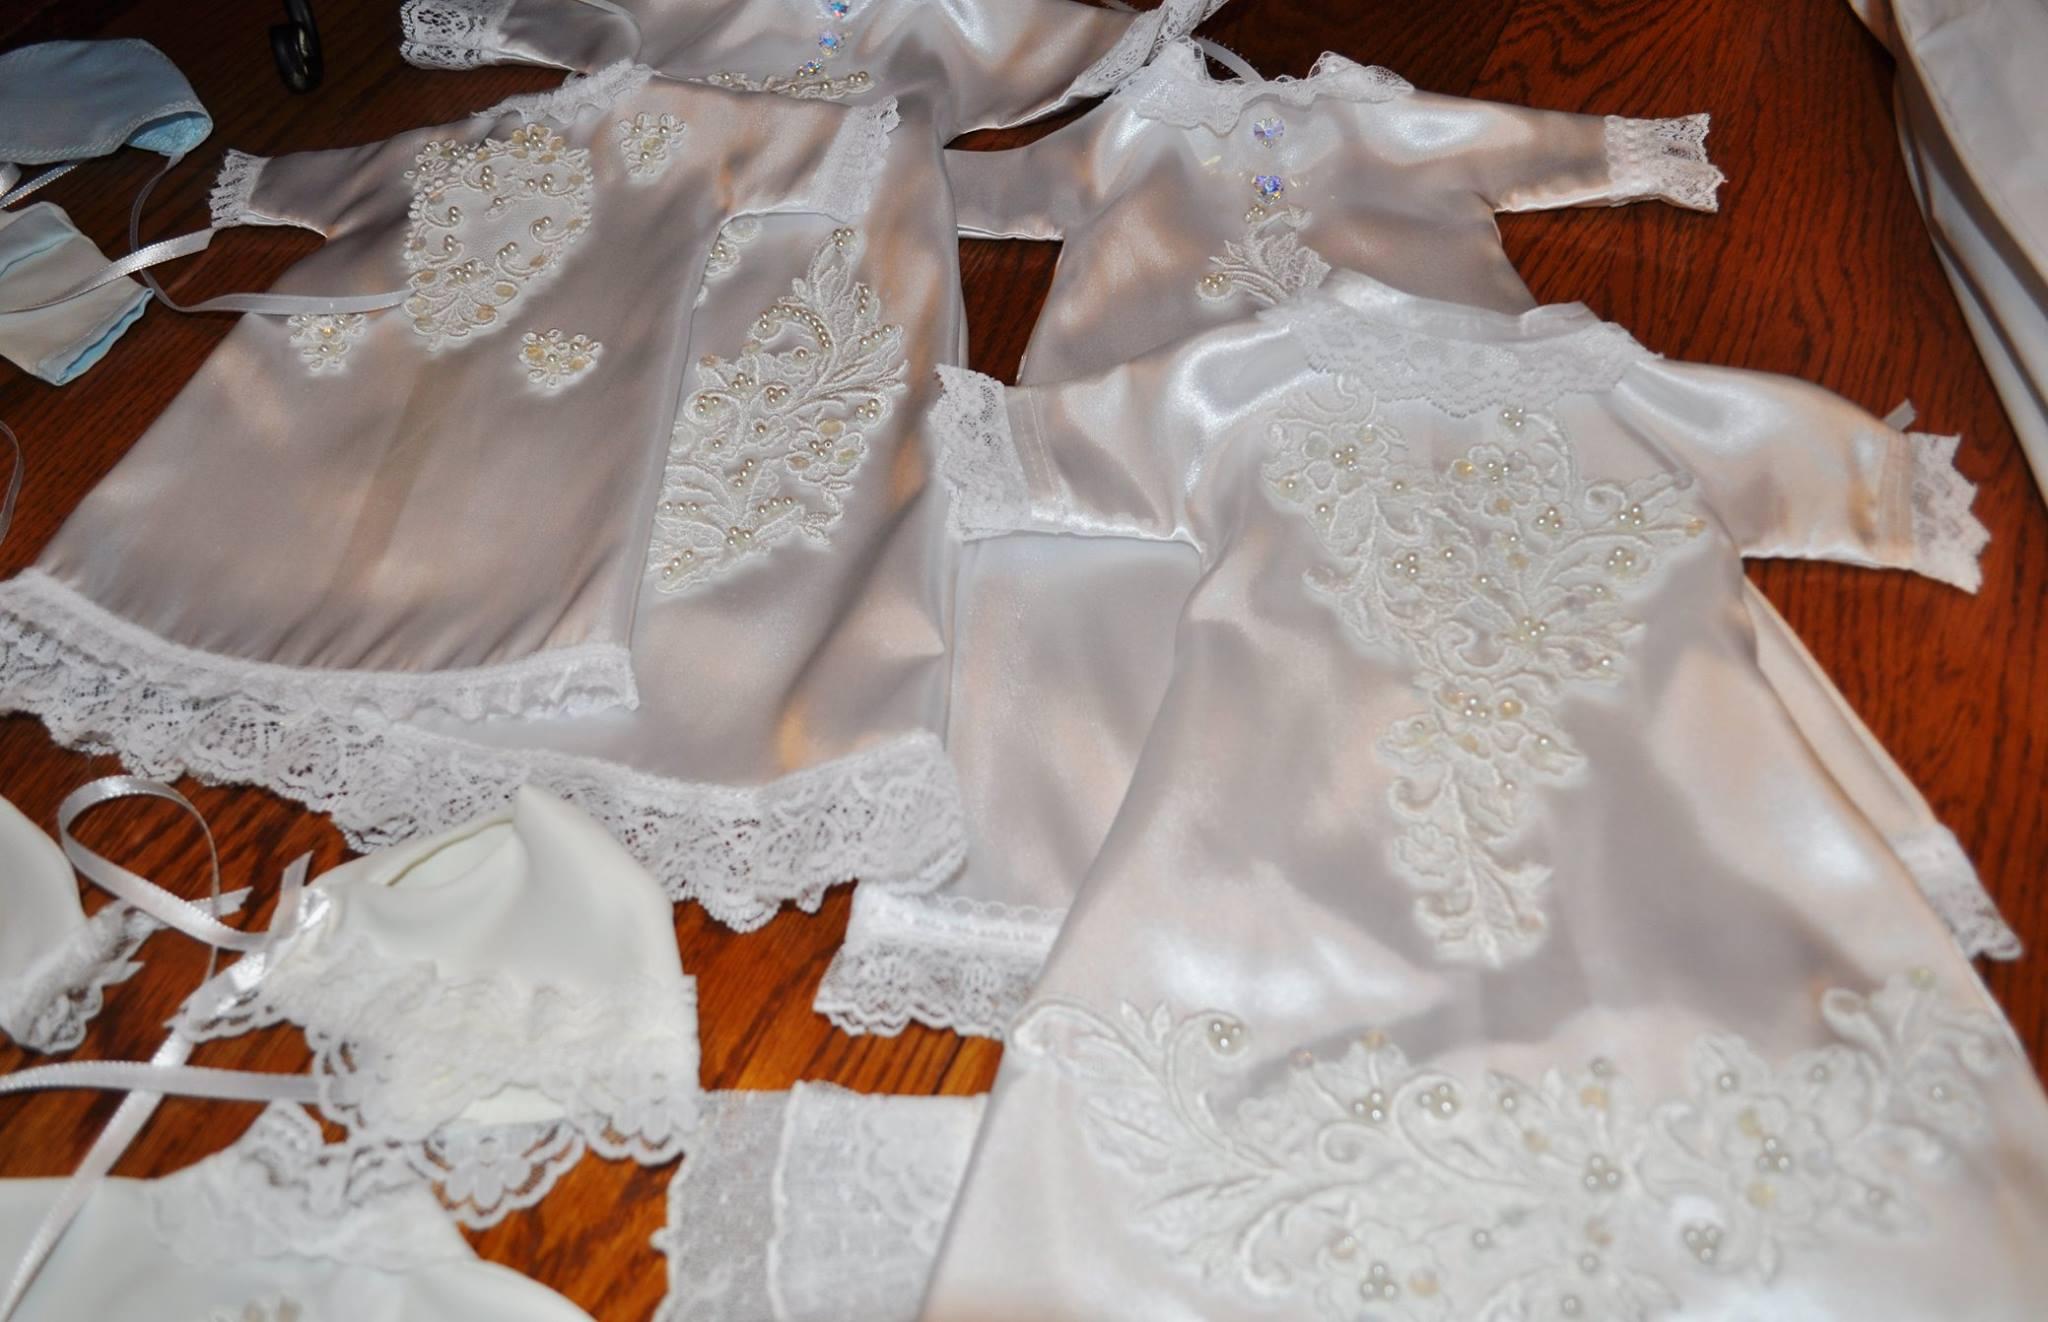 Donated wedding dresses help parents grieve after losing